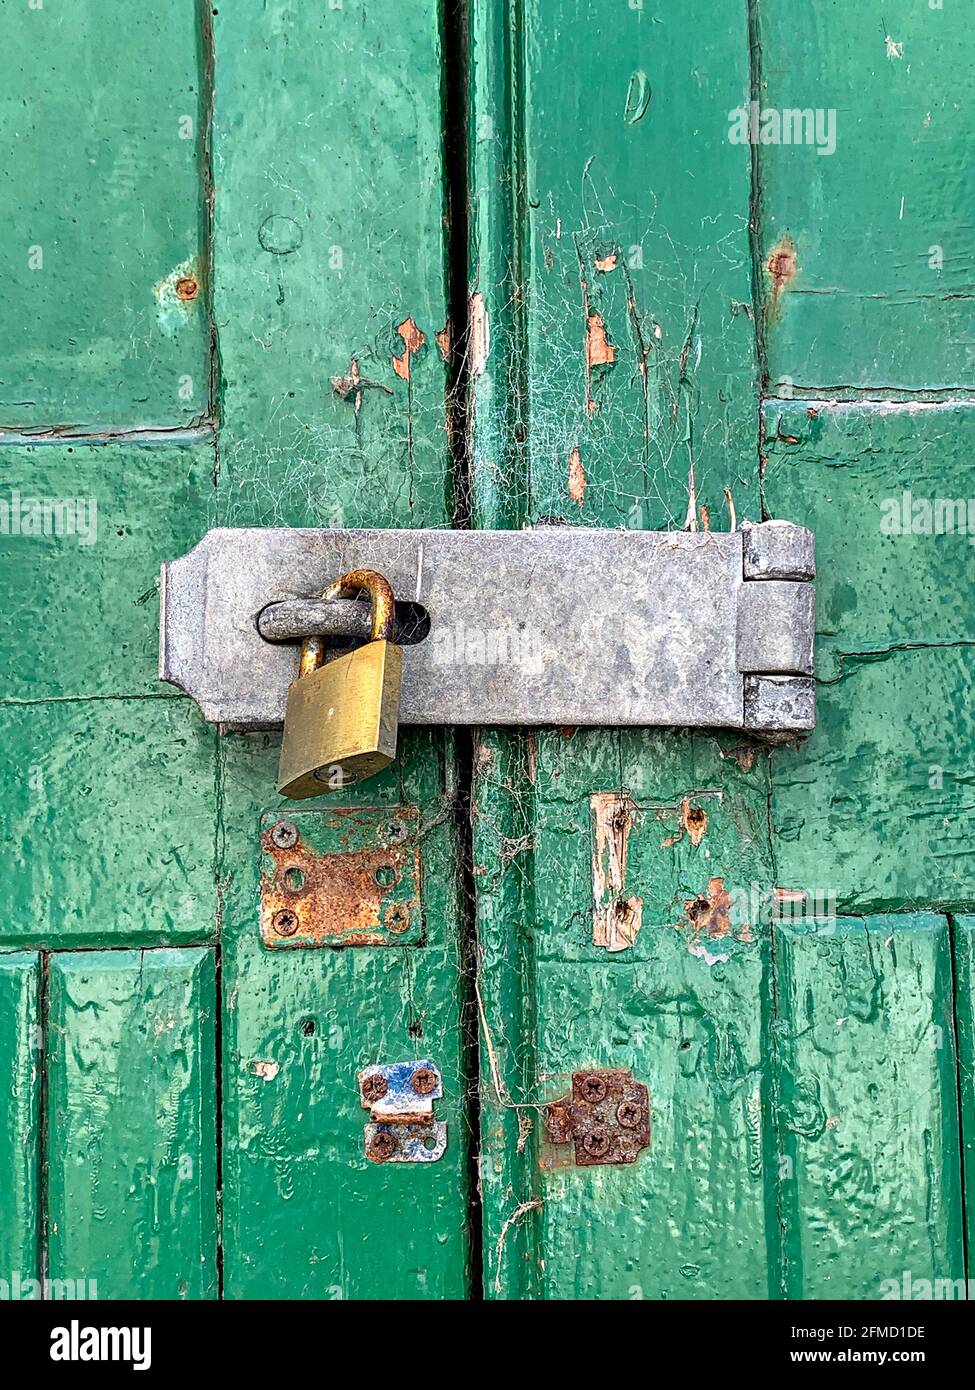 Green painted wooden doors with security hasp, staple and brass padlock Stock Photo